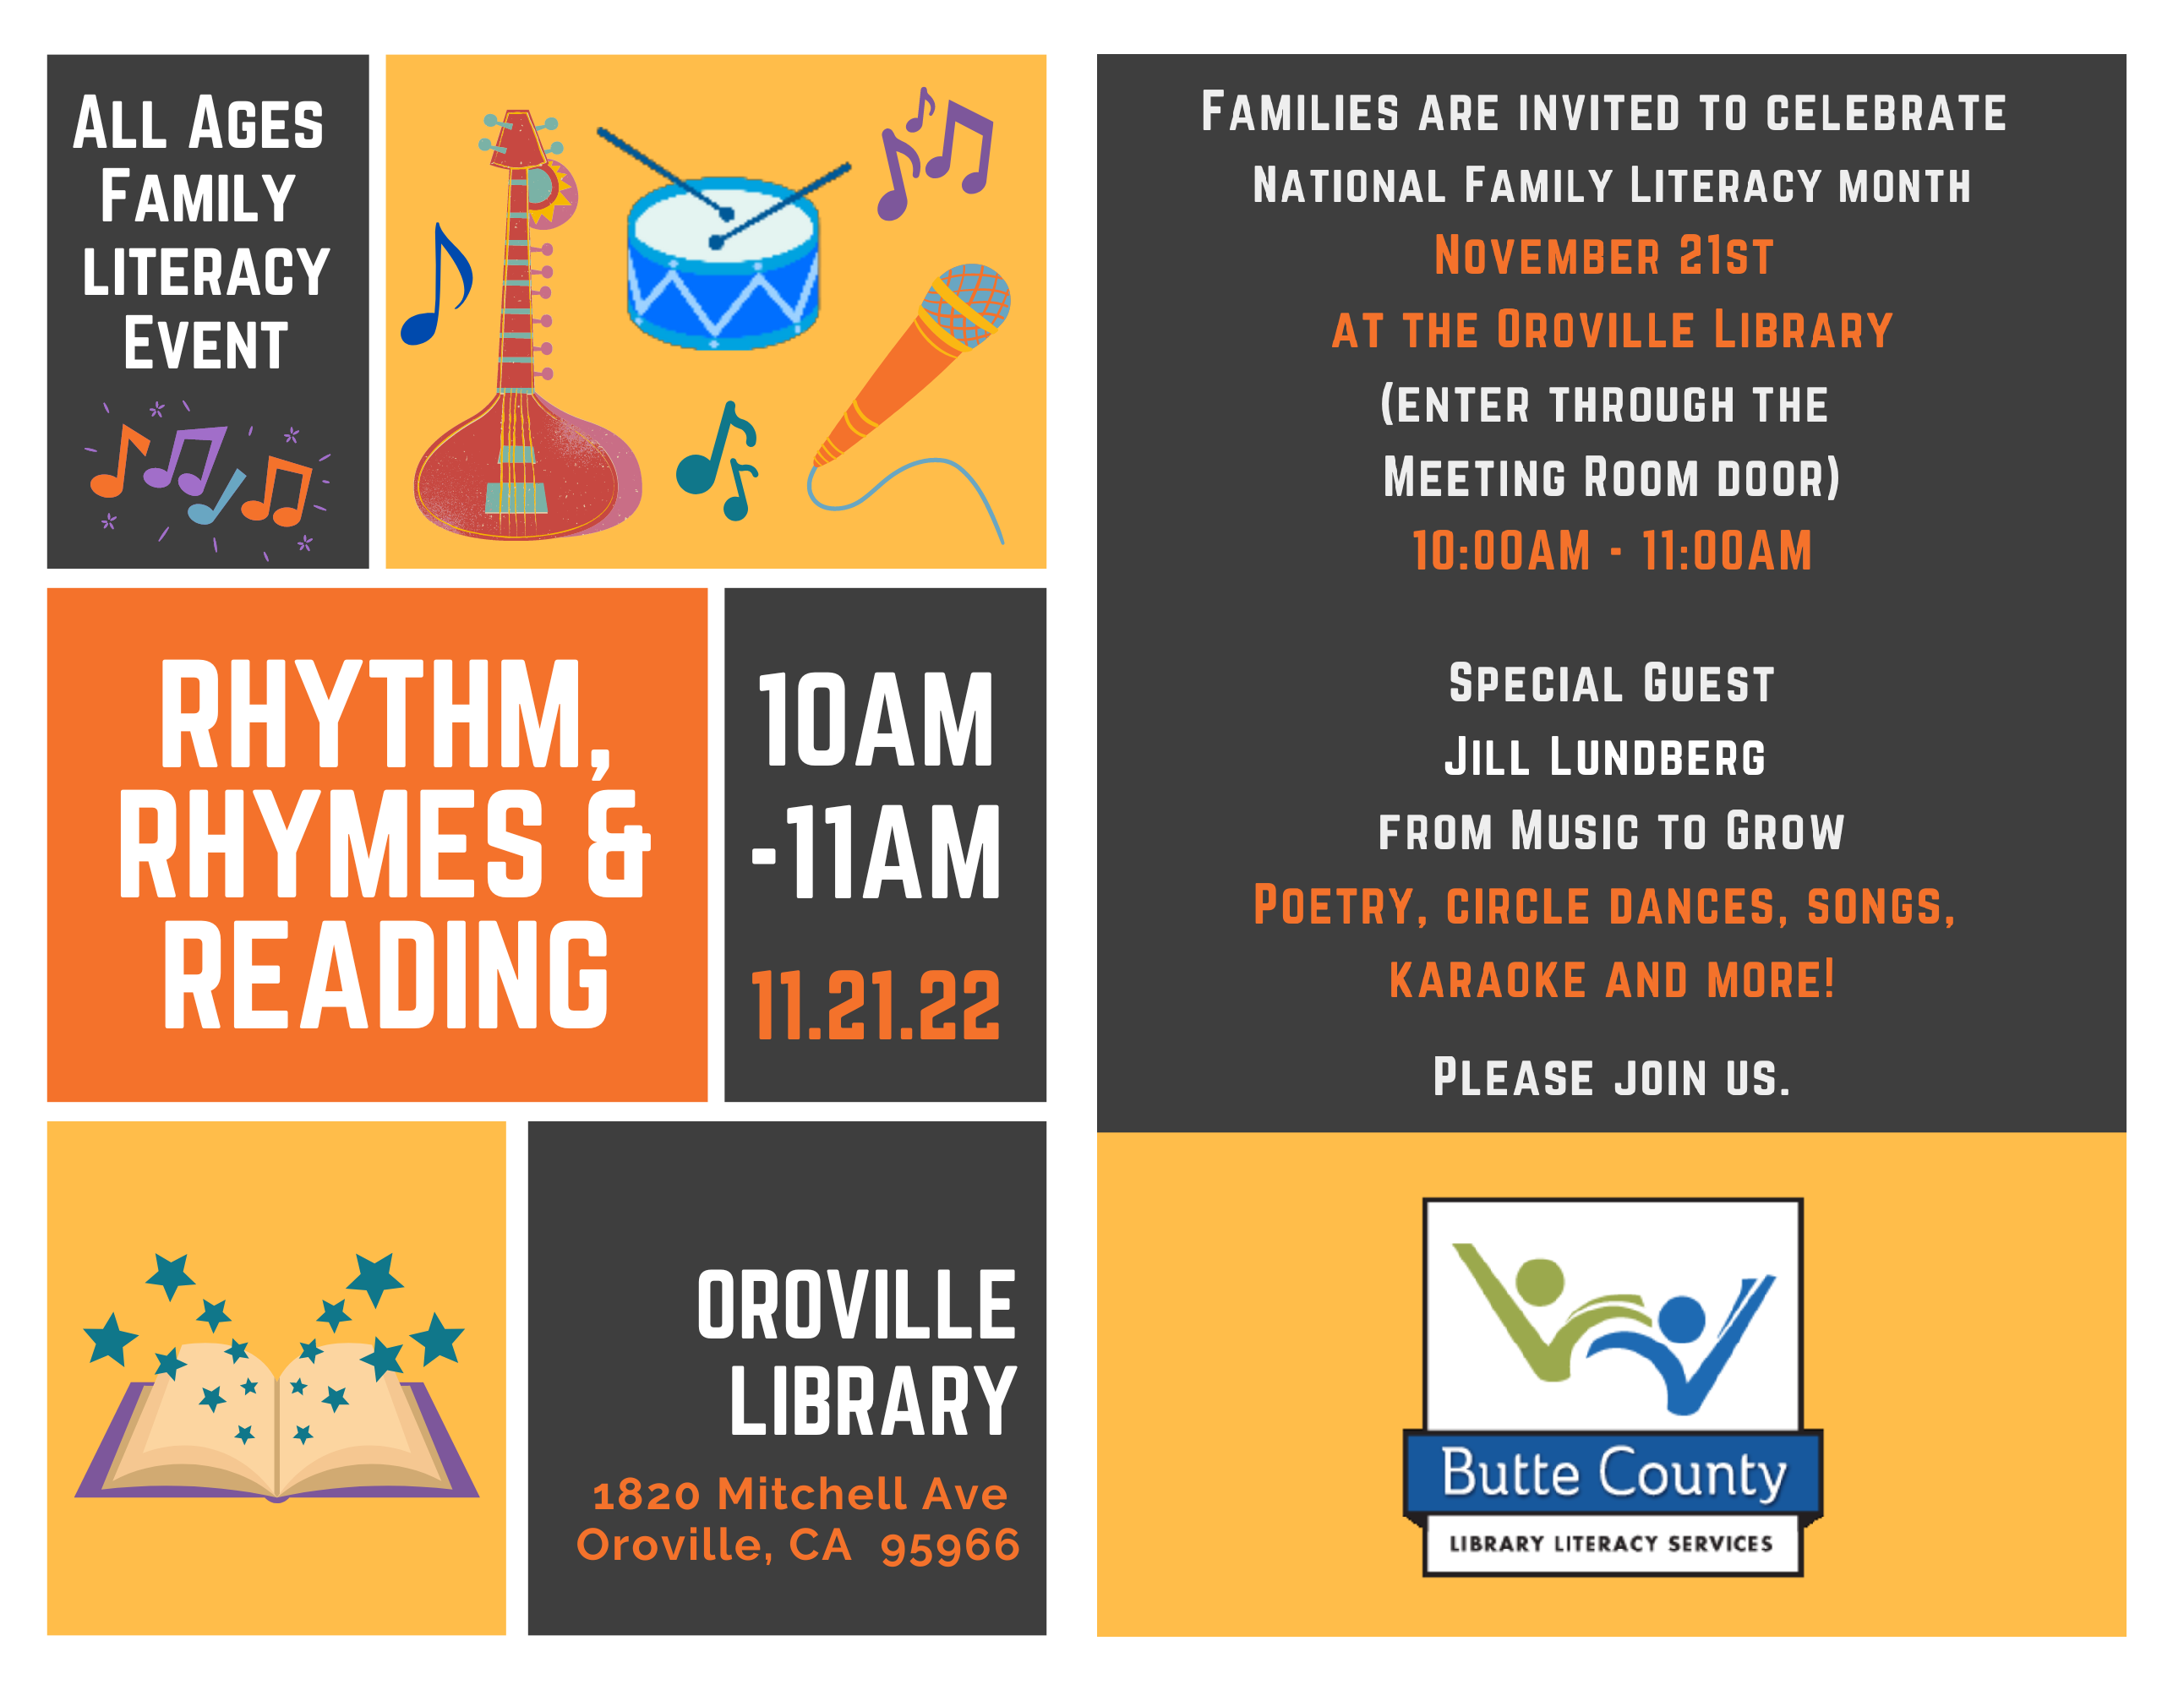 Rhythm, Rhymes & Reading -- Join us 11/21/2022 at the Oroville Branch from 10:00 to 11:00 am.